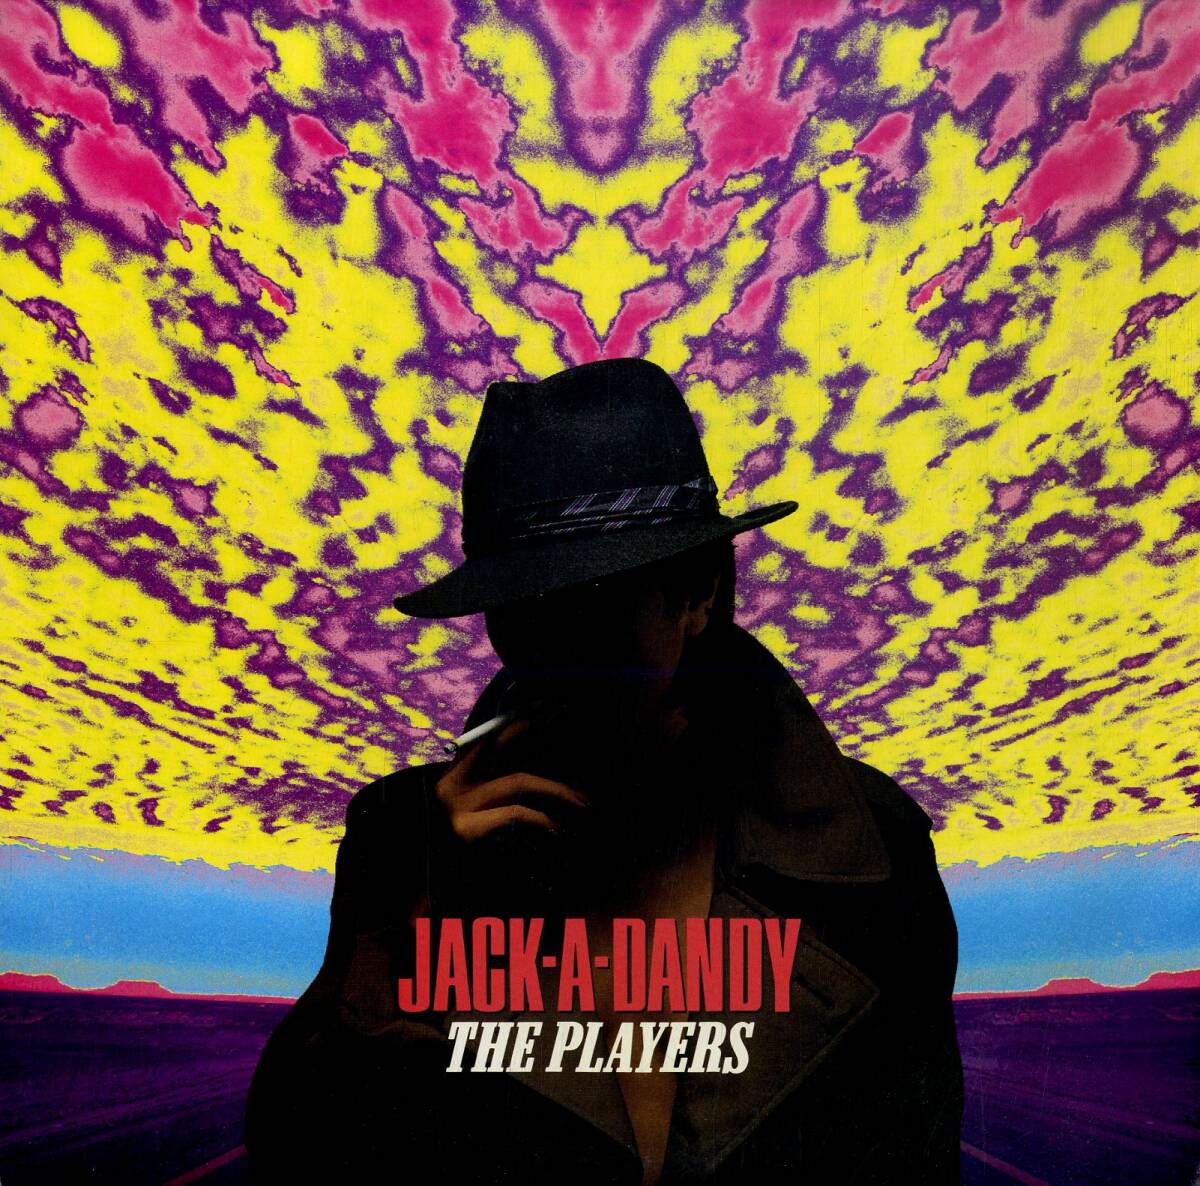 A00569892/LP/The Players「Jack-A-Dandy」の画像1